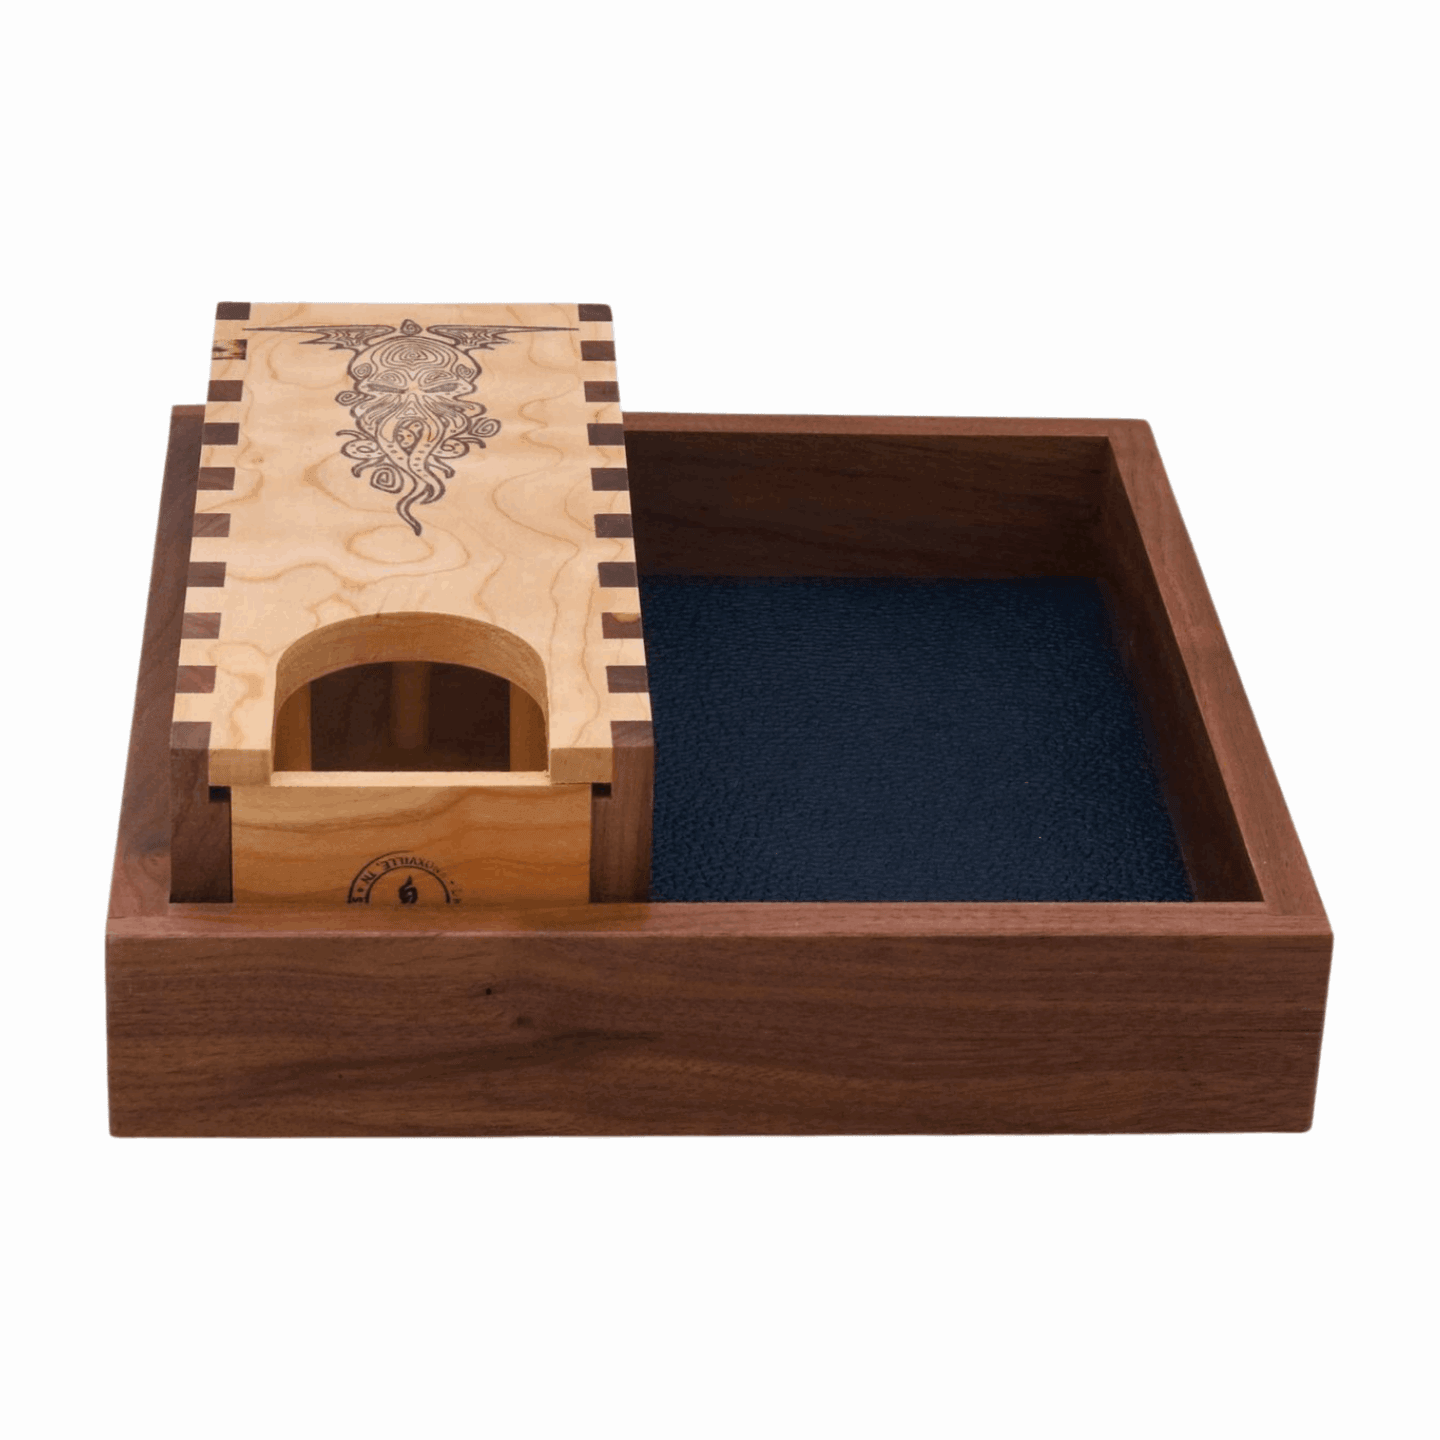 Large Walnut Wood Dice Tray for Tabletop Gaming - Dragon Armor Games